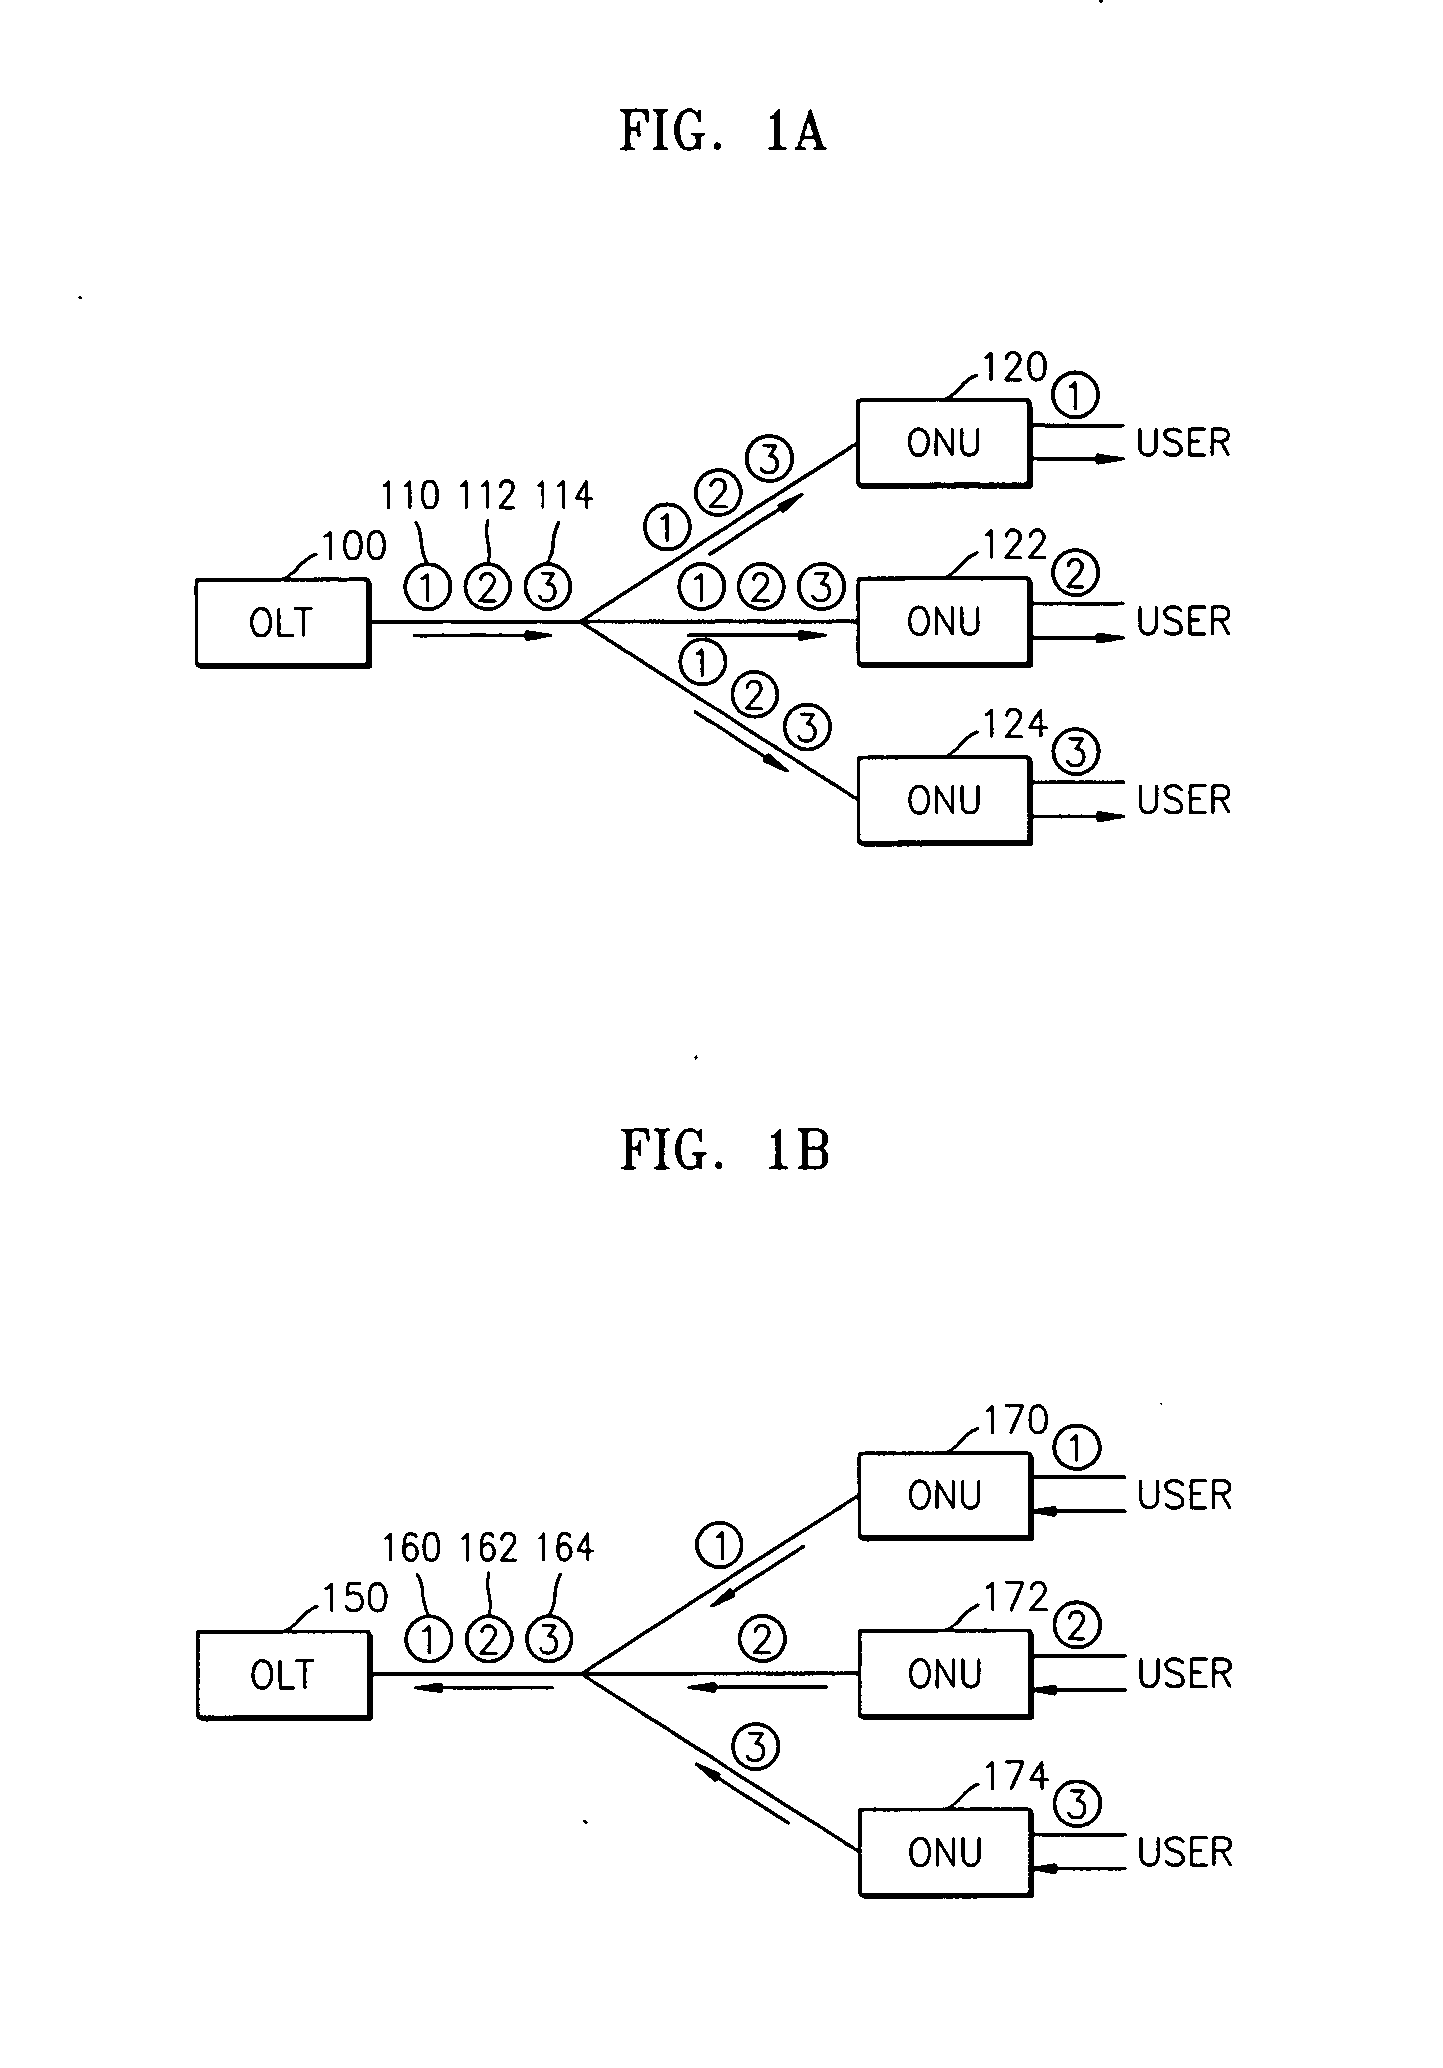 Ethernet switch, and apparatus and method for expanding port